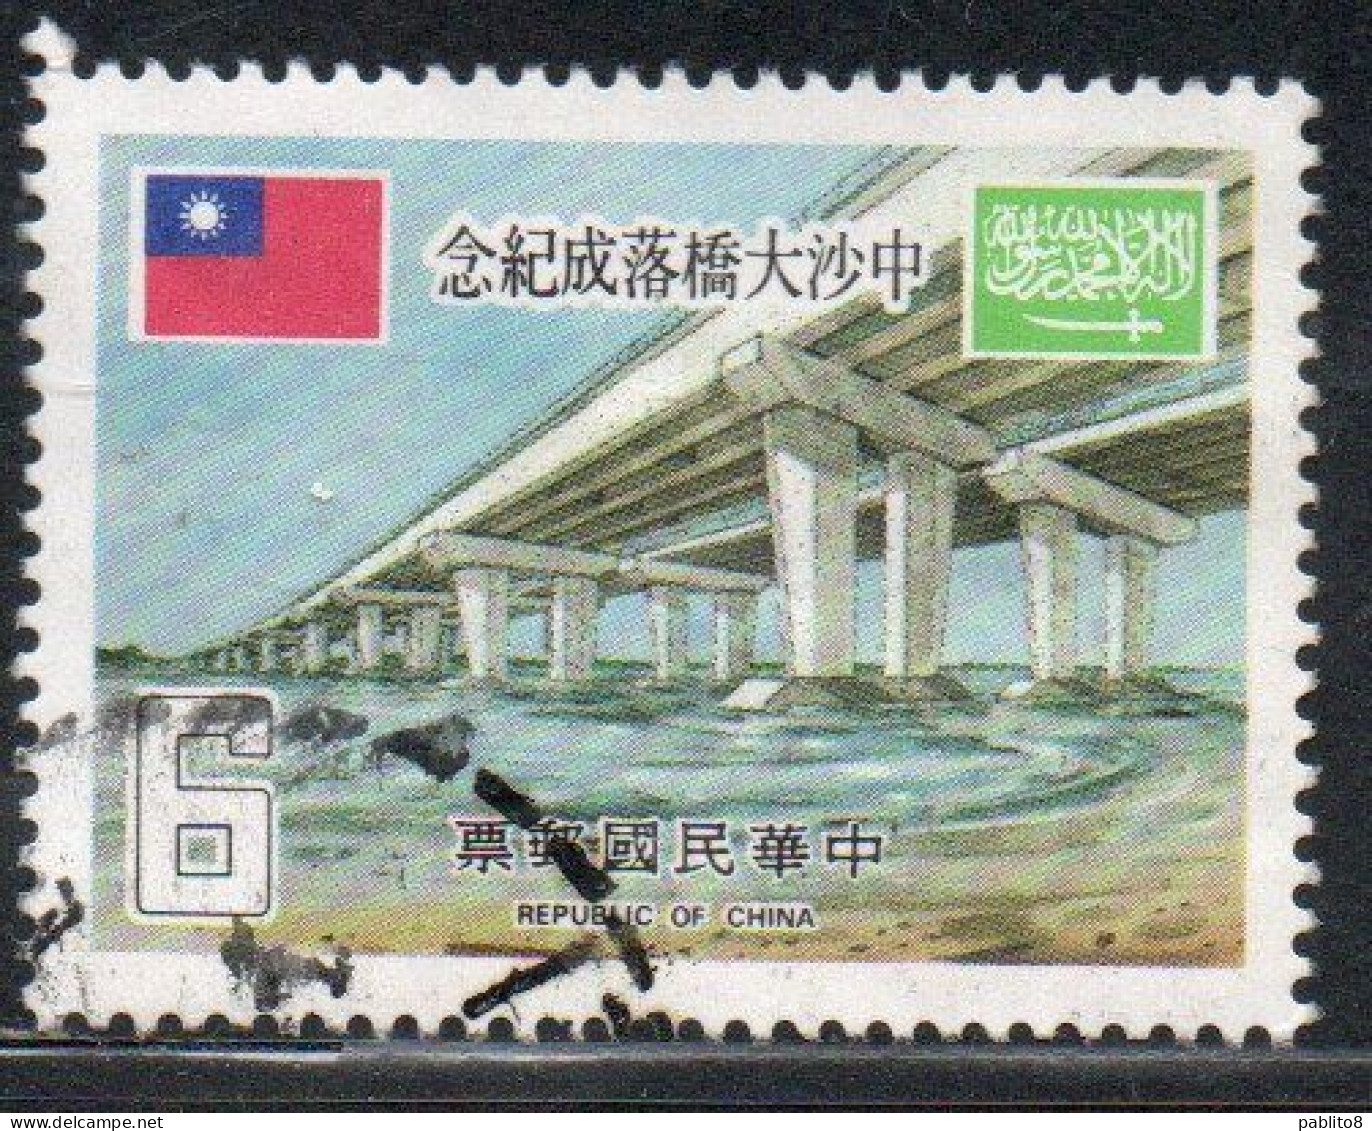 CHINA REPUBLIC CINA TAIWAN FORMOSA 1978 COMPLETION SINO-SAUDI BRIDGE OVER CHO-SHUI RIVER BUTRESSES 6$ USED USATO OBLITER - Used Stamps